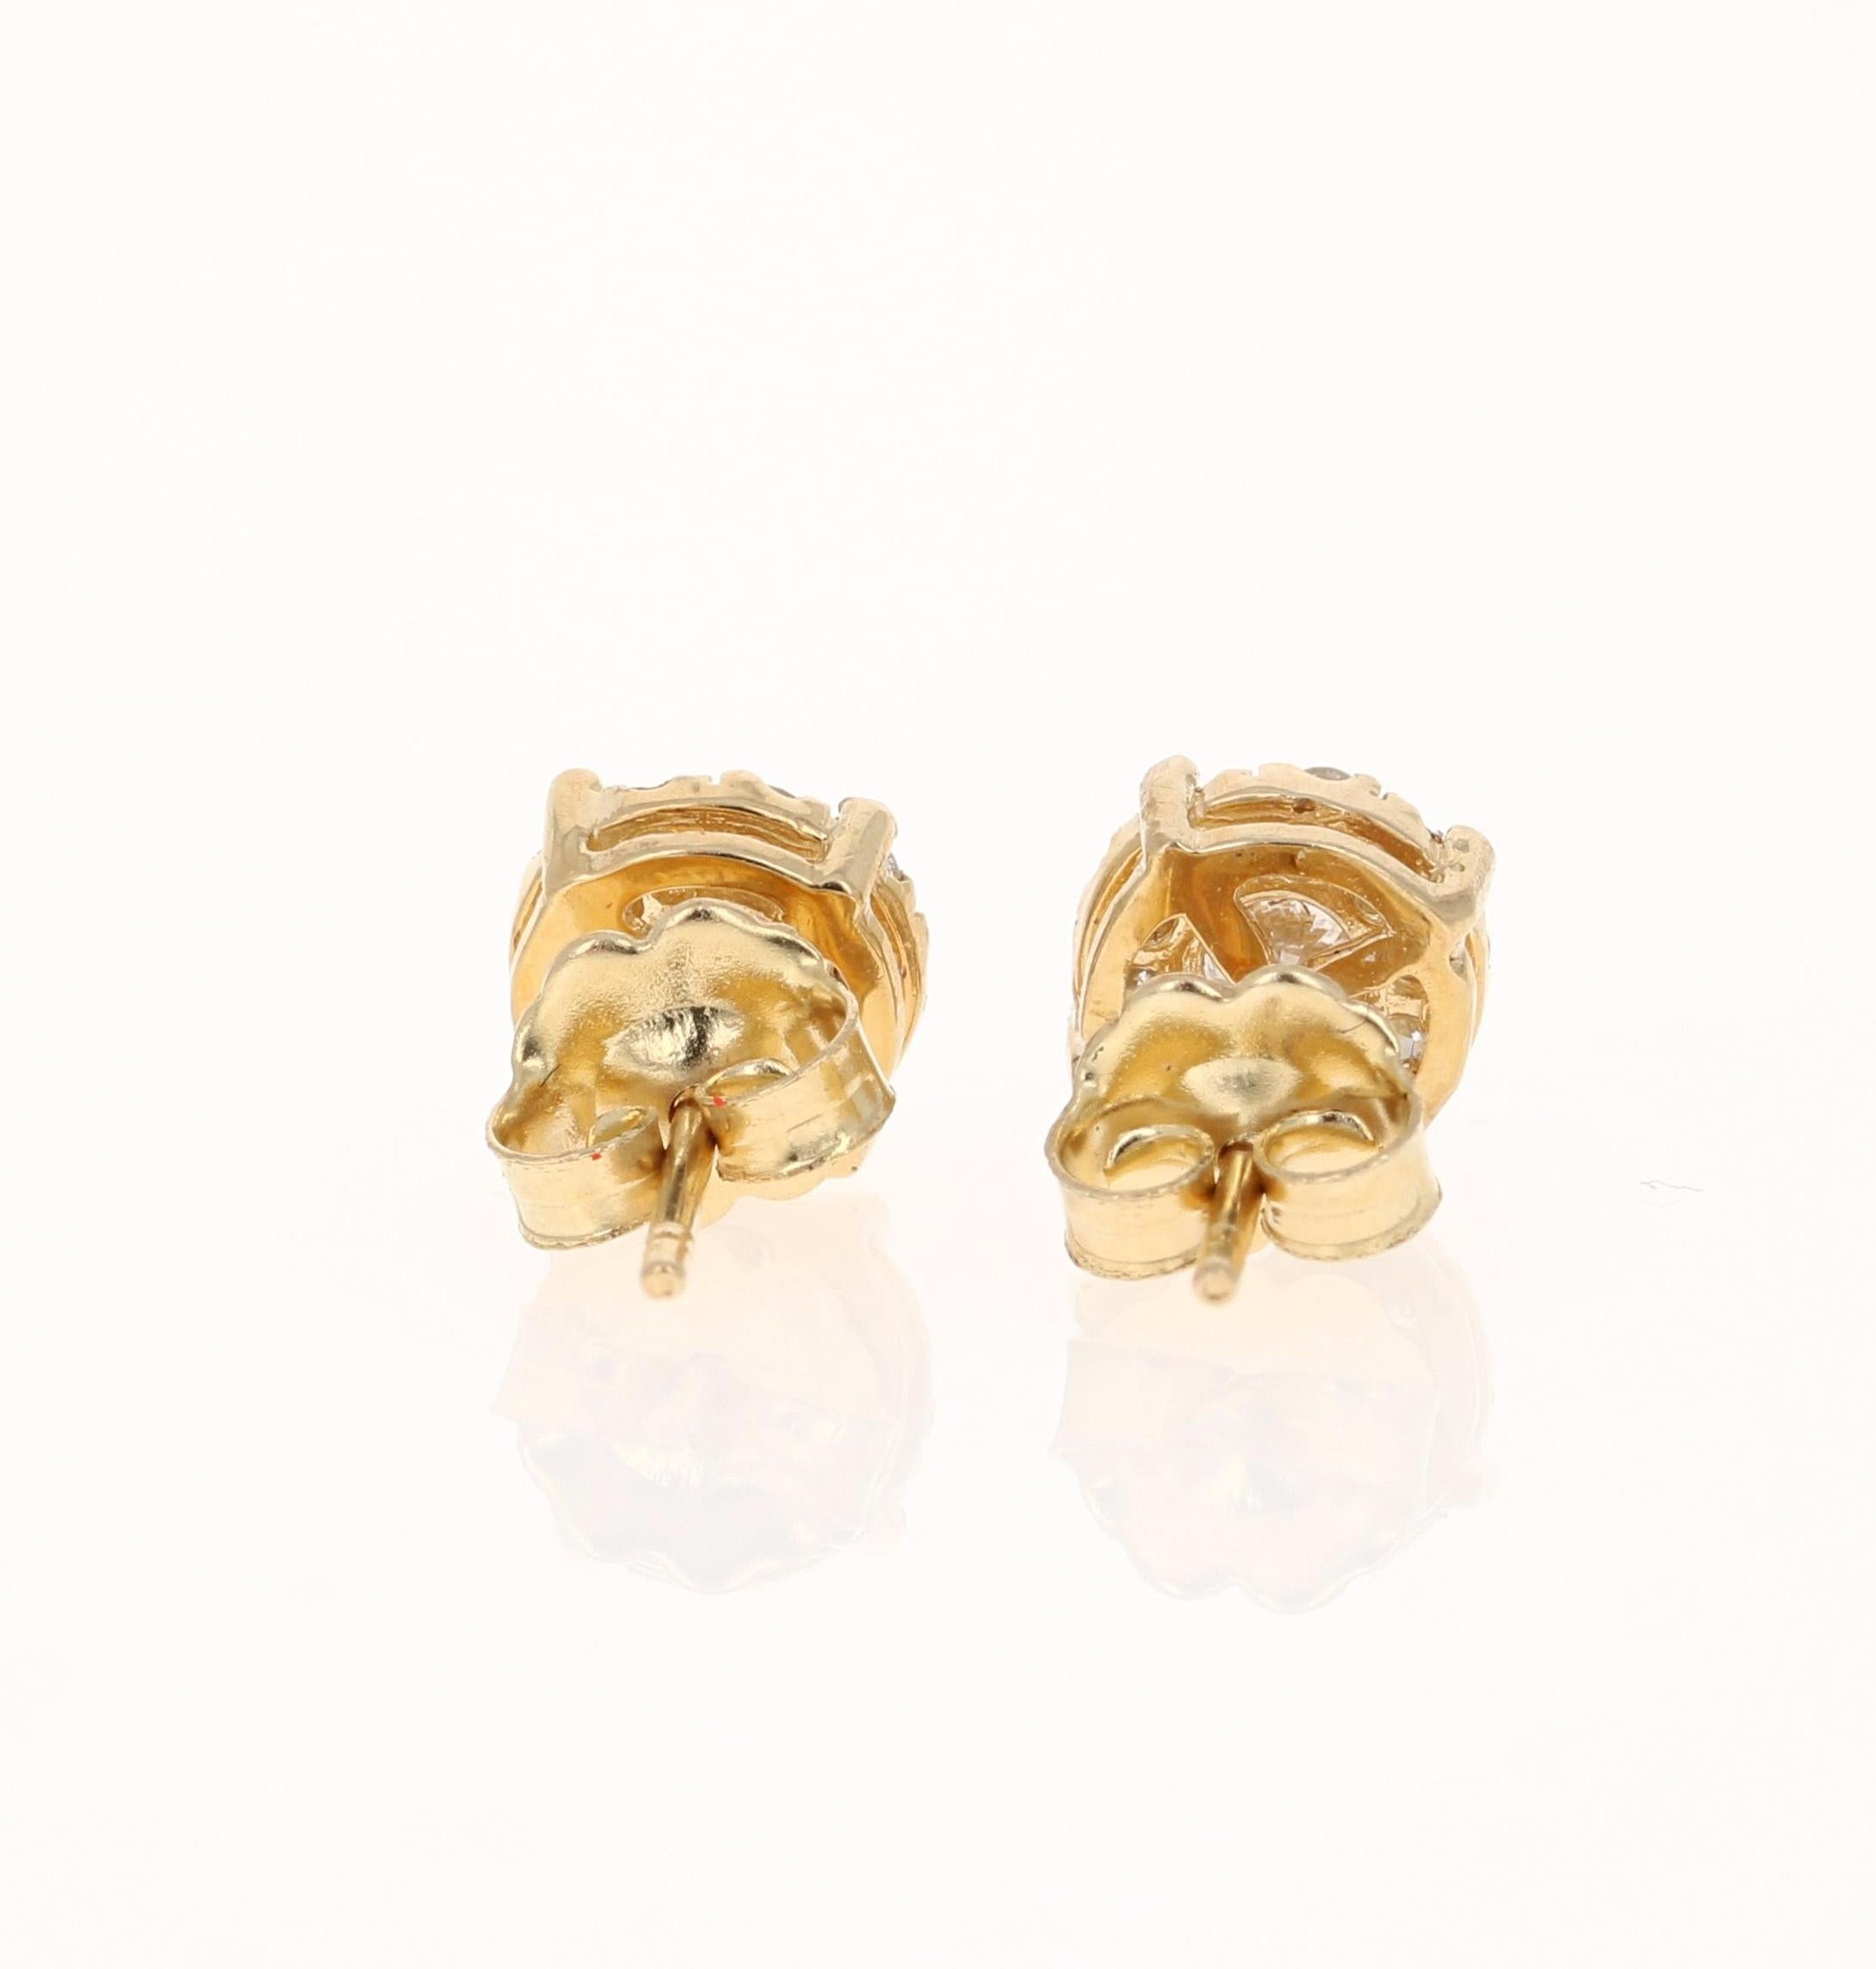 Round Cut 0.57 Carat Round Invisible 14 Karat Yellow Gold Stud Earrings